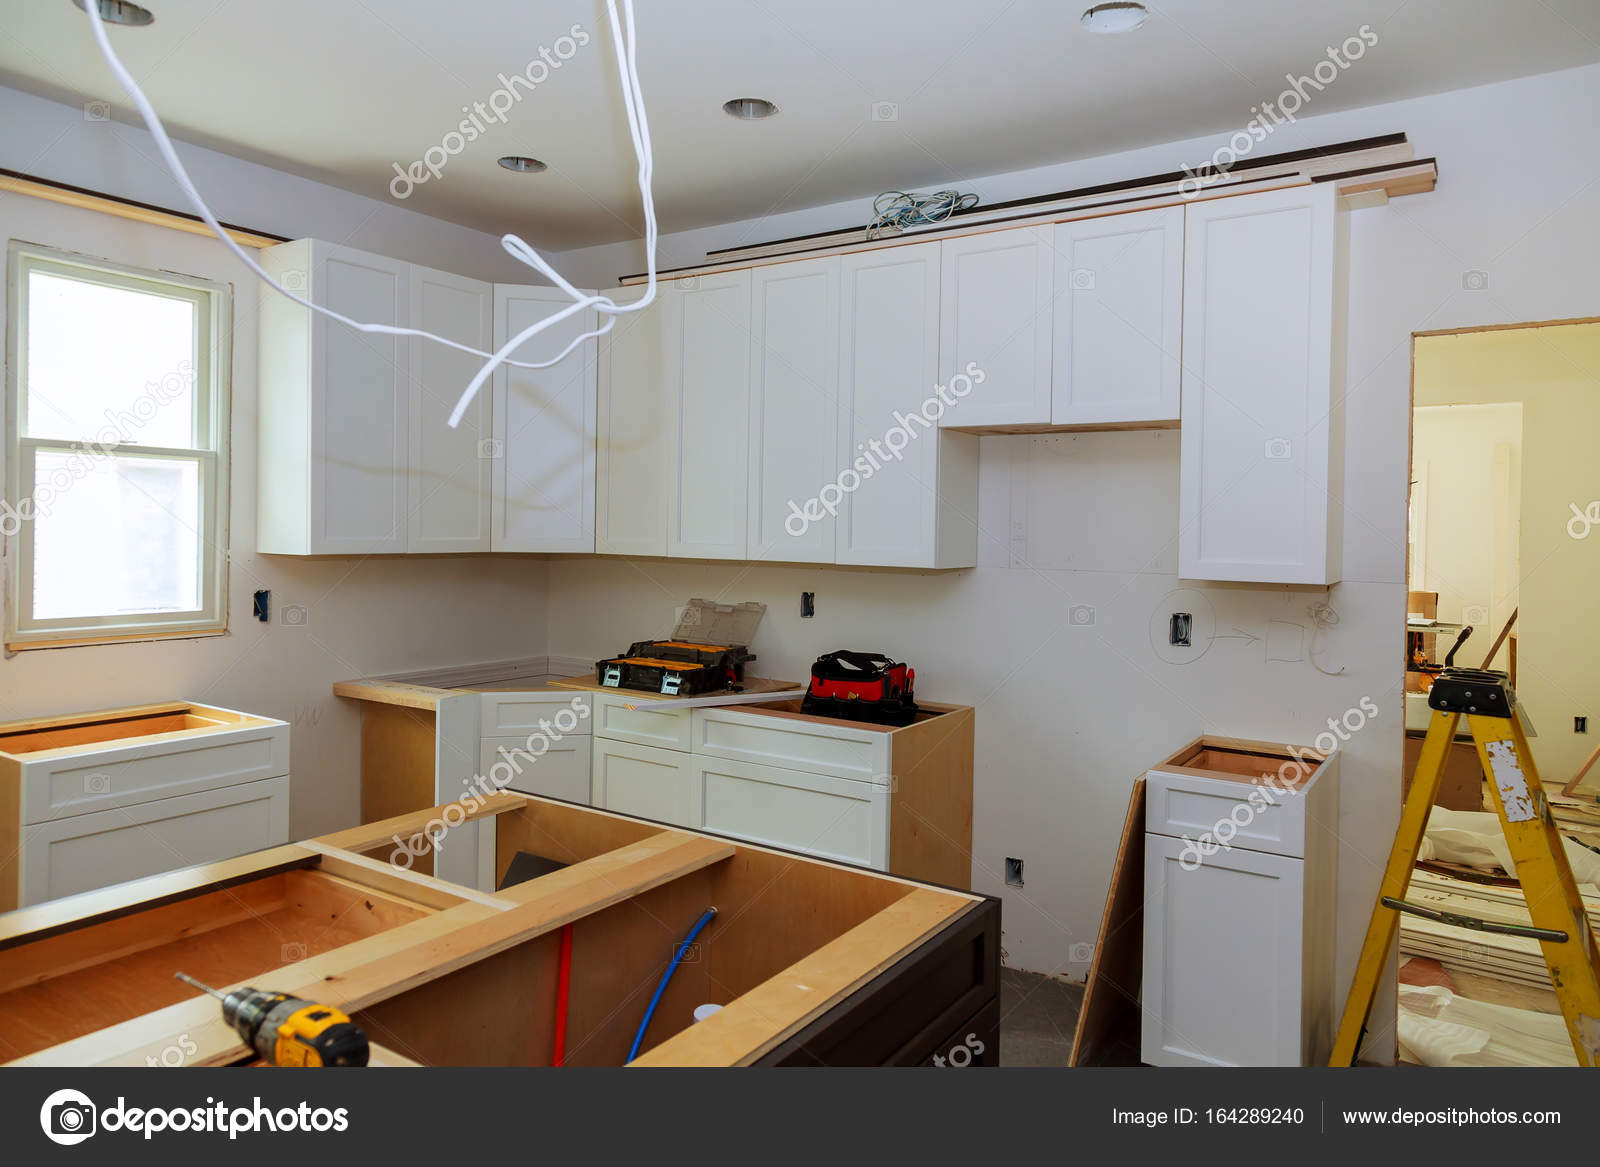 Installation Of Kitchen The Drawer In Cabinet Stock Photo